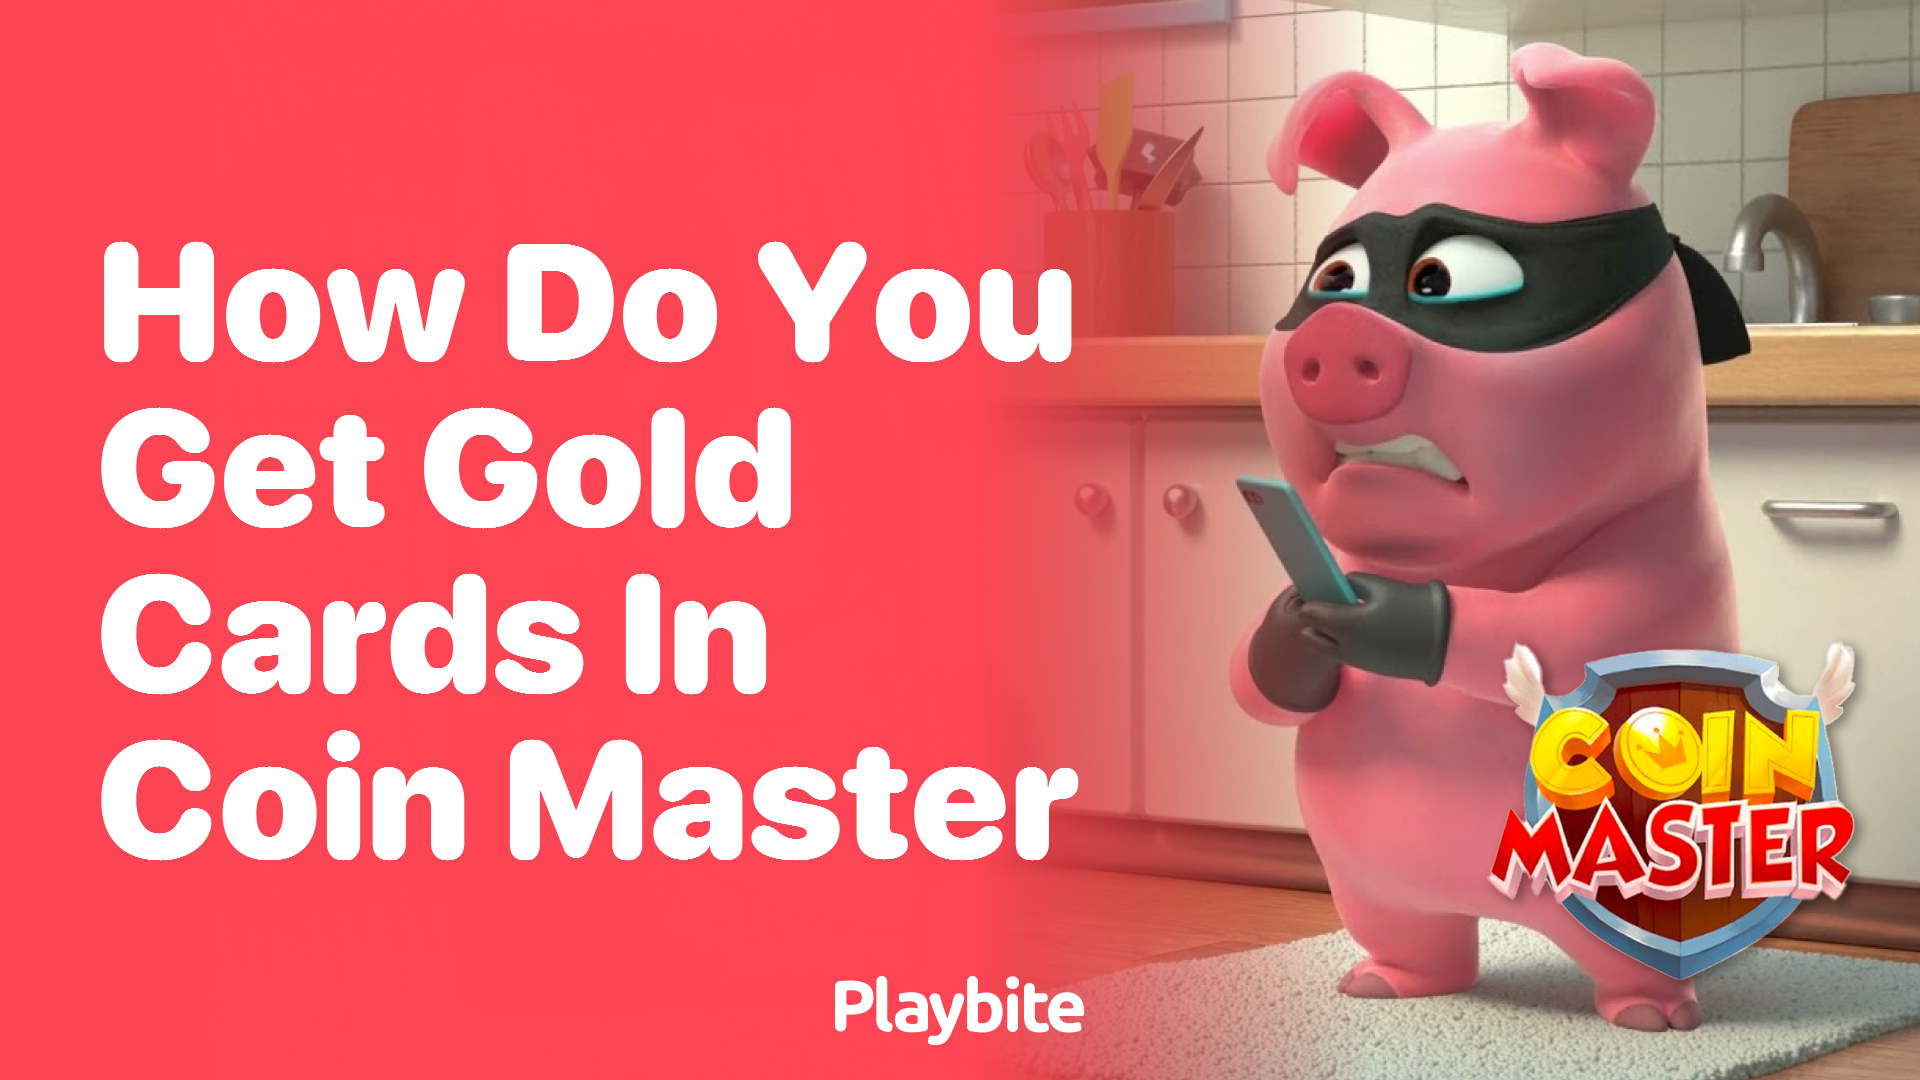 Golden Cards from the Chests in Coin Master